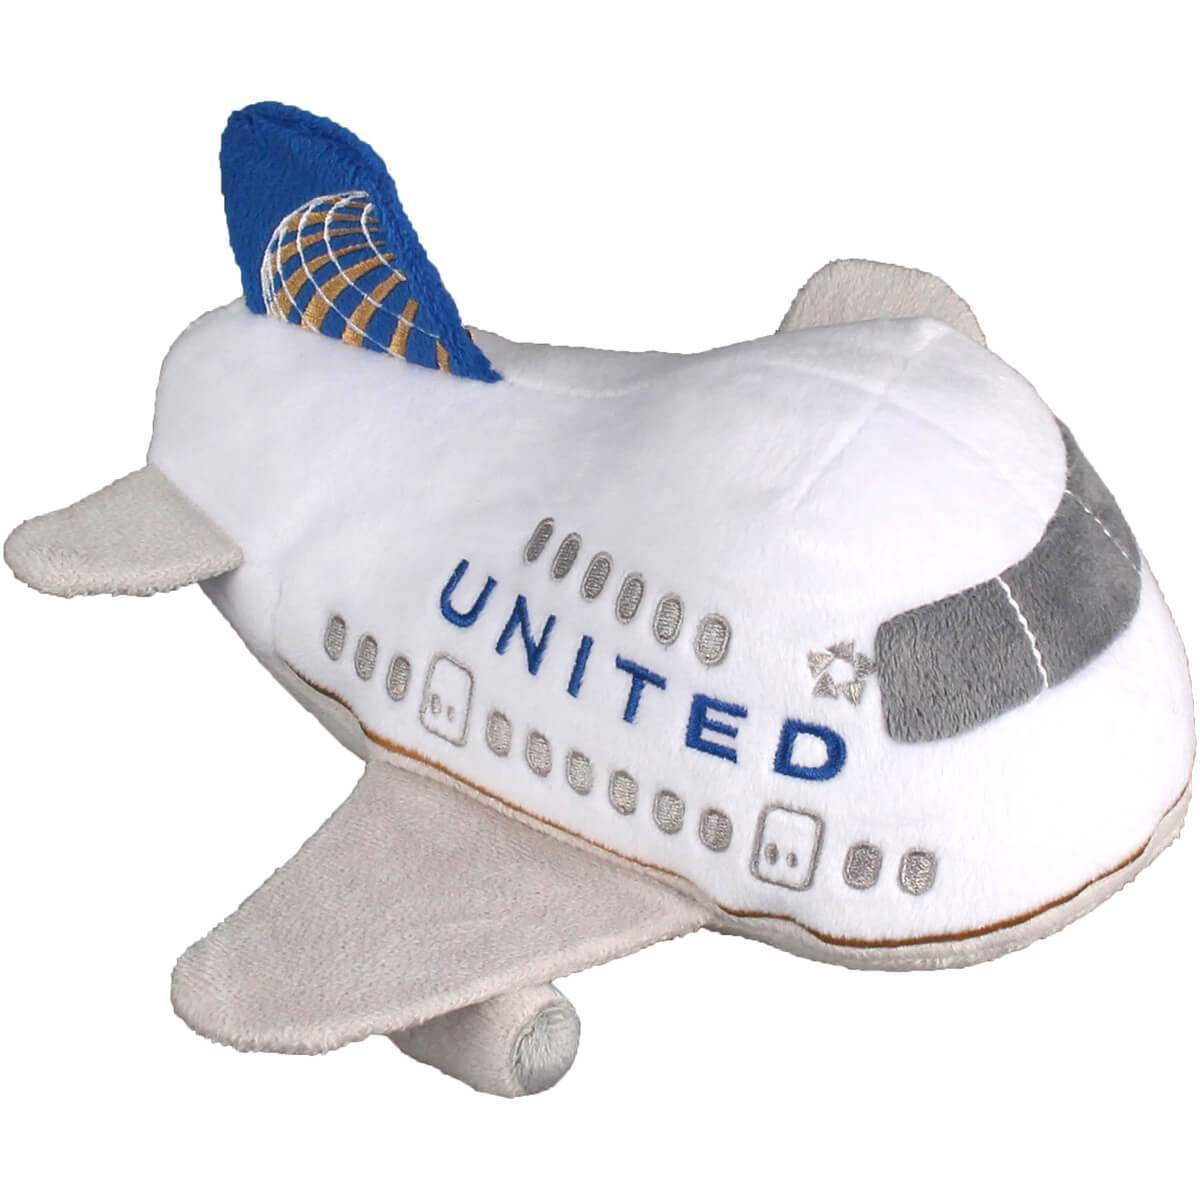 United Airlines Plush Airplane Toy - PilotMall.com